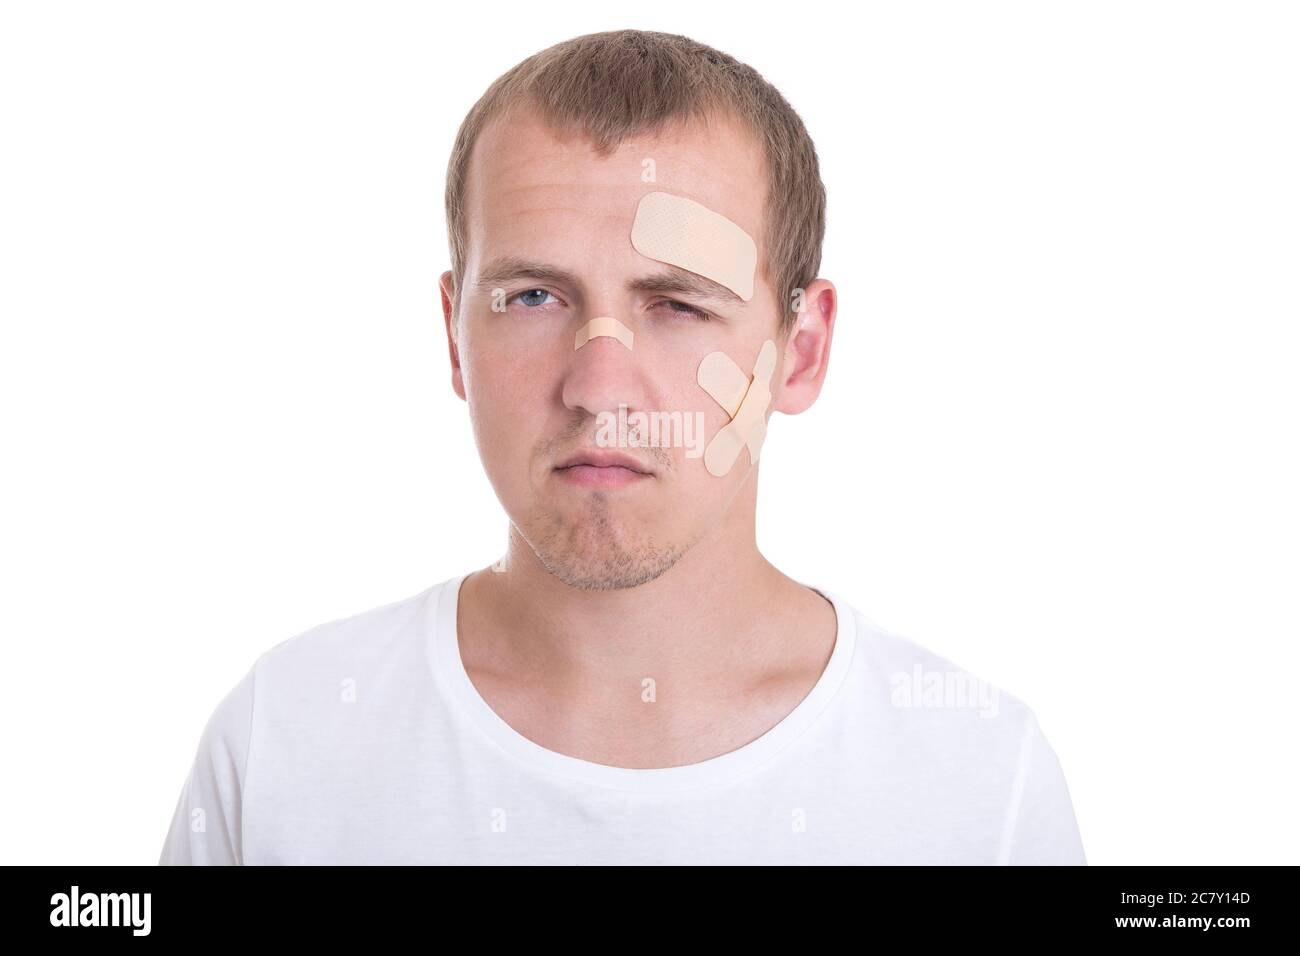 sad and injured young man with adhesive plaster on his face Stock Photo